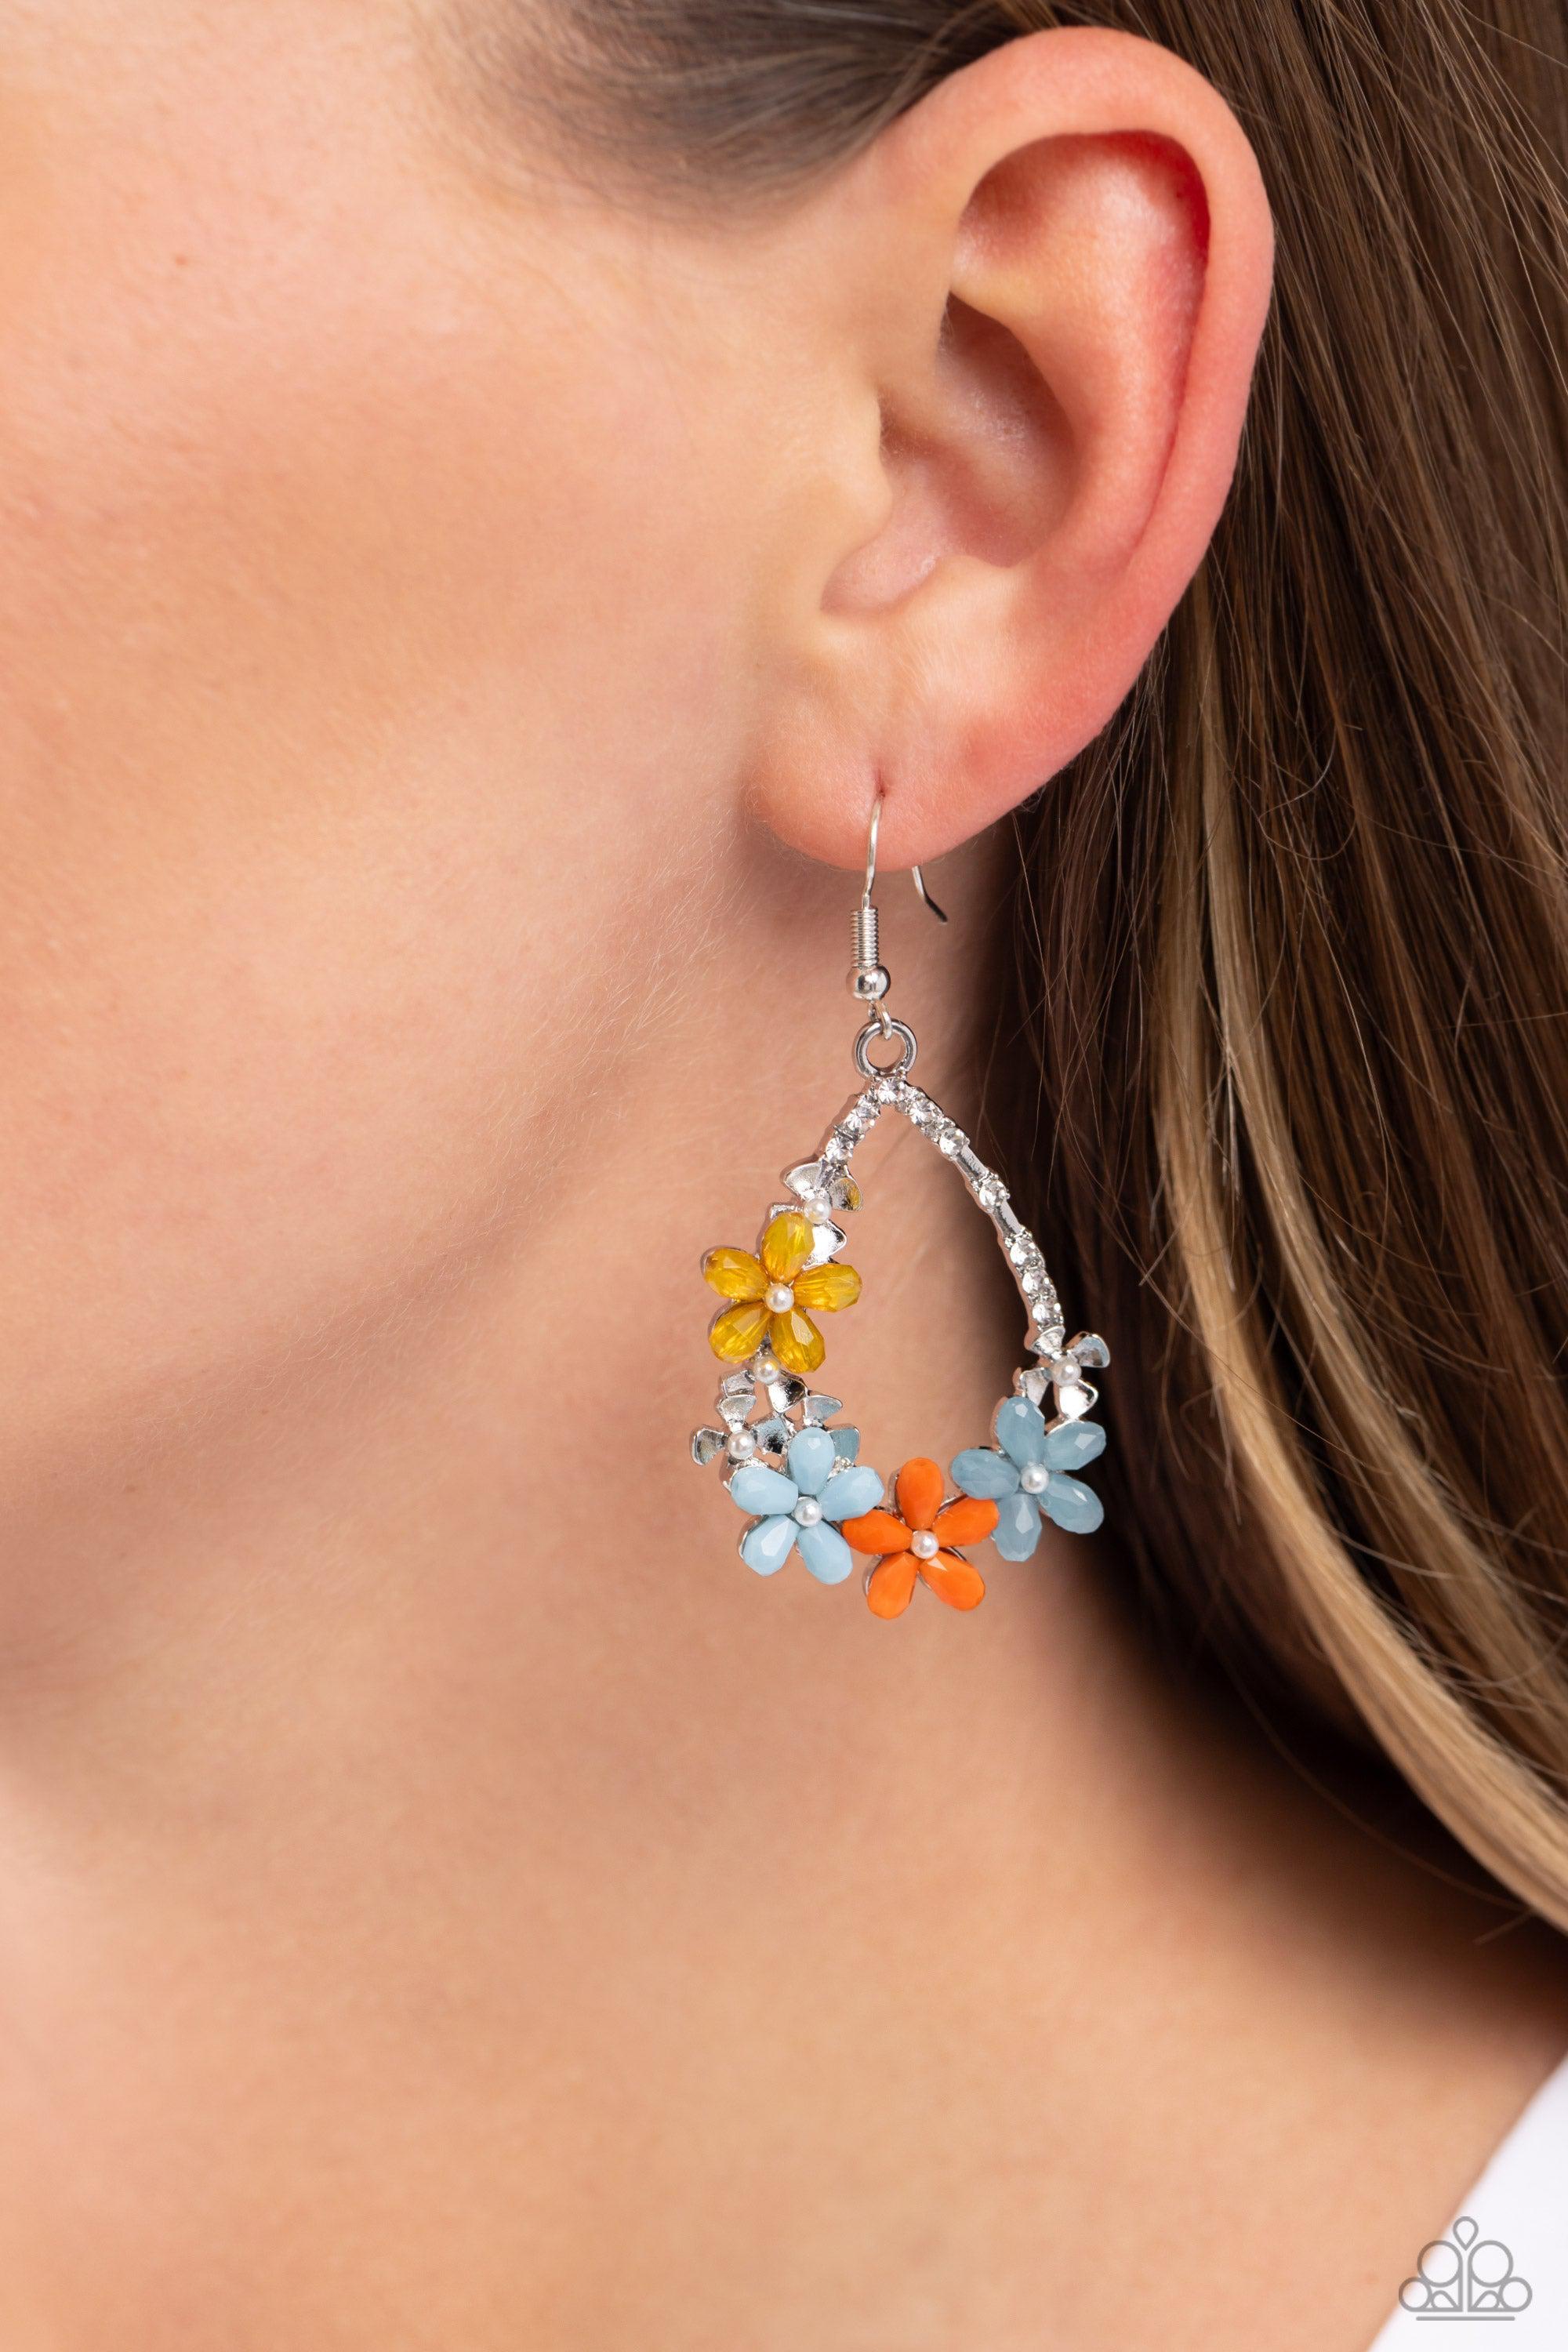 Boisterous Blooms Multi Flower Earrings - Paparazzi Accessories- lightbox - CarasShop.com - $5 Jewelry by Cara Jewels